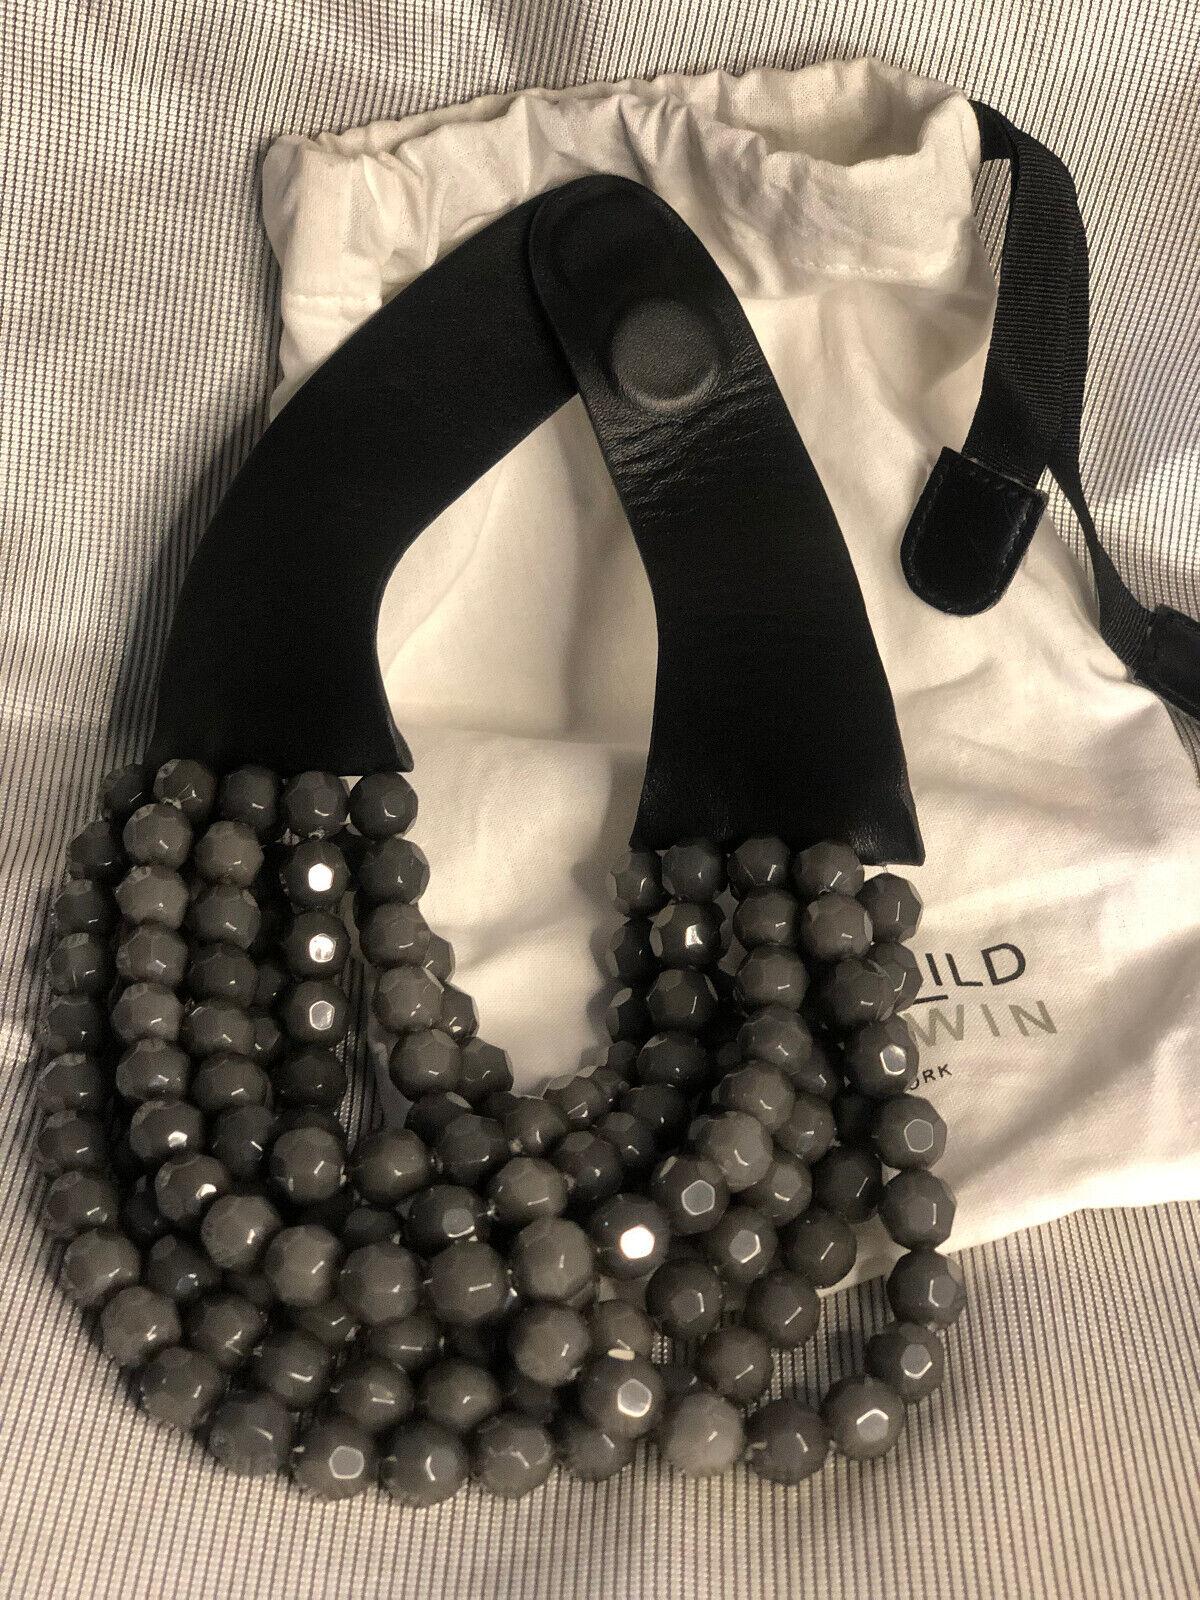 Simply Fabulous! Designer 8 Row Multi Strand Gray Bead and Leather Necklace with magnetic clasp closure. Necklace measures approx. 18